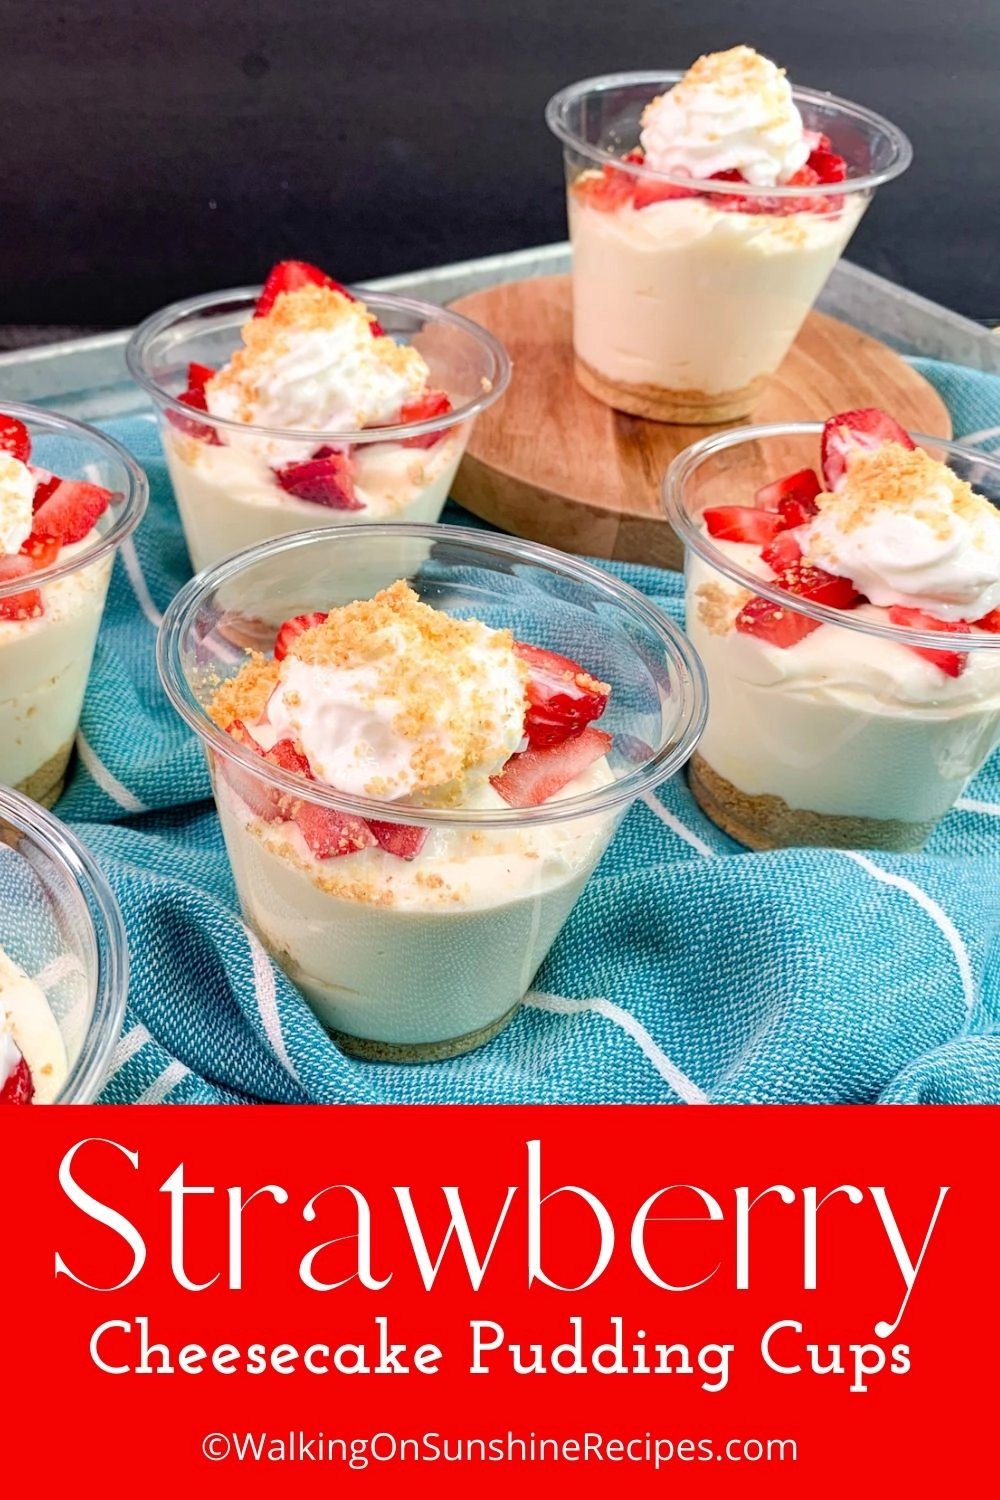 Small cups filled with pudding and fresh strawberries. 